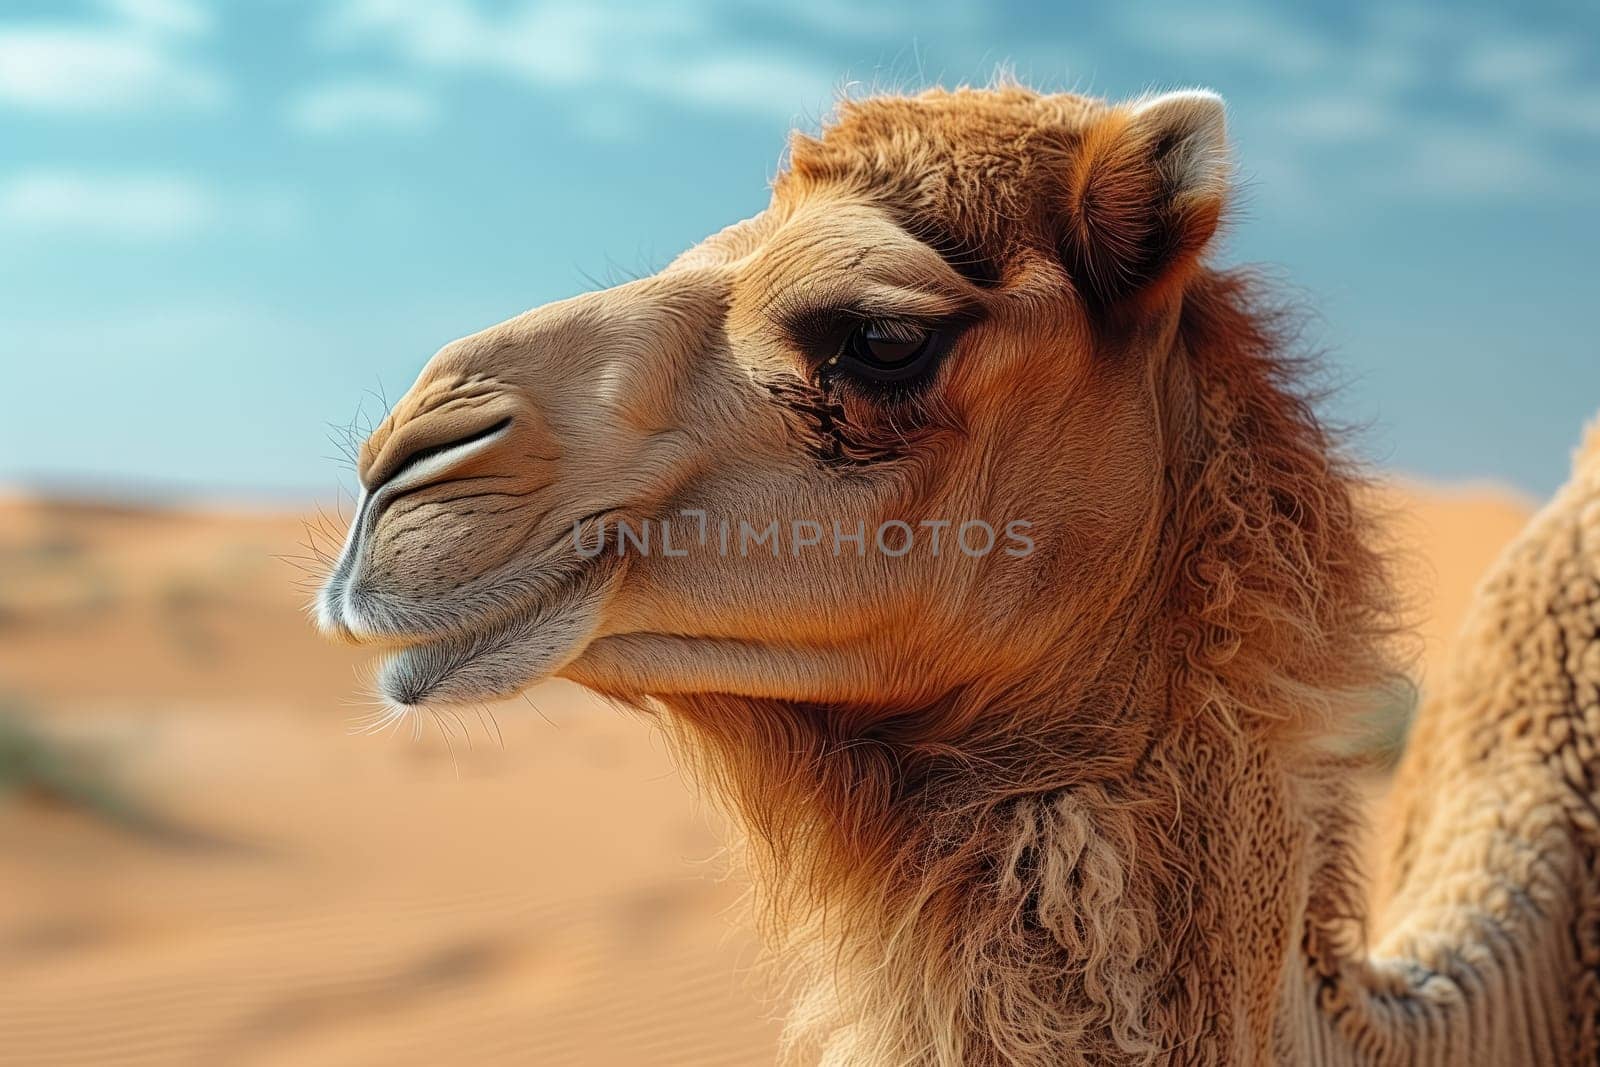 A closeup shot of a camels eye against the desert landscape, showcasing the adaptation of this terrestrial animal to its natural environment